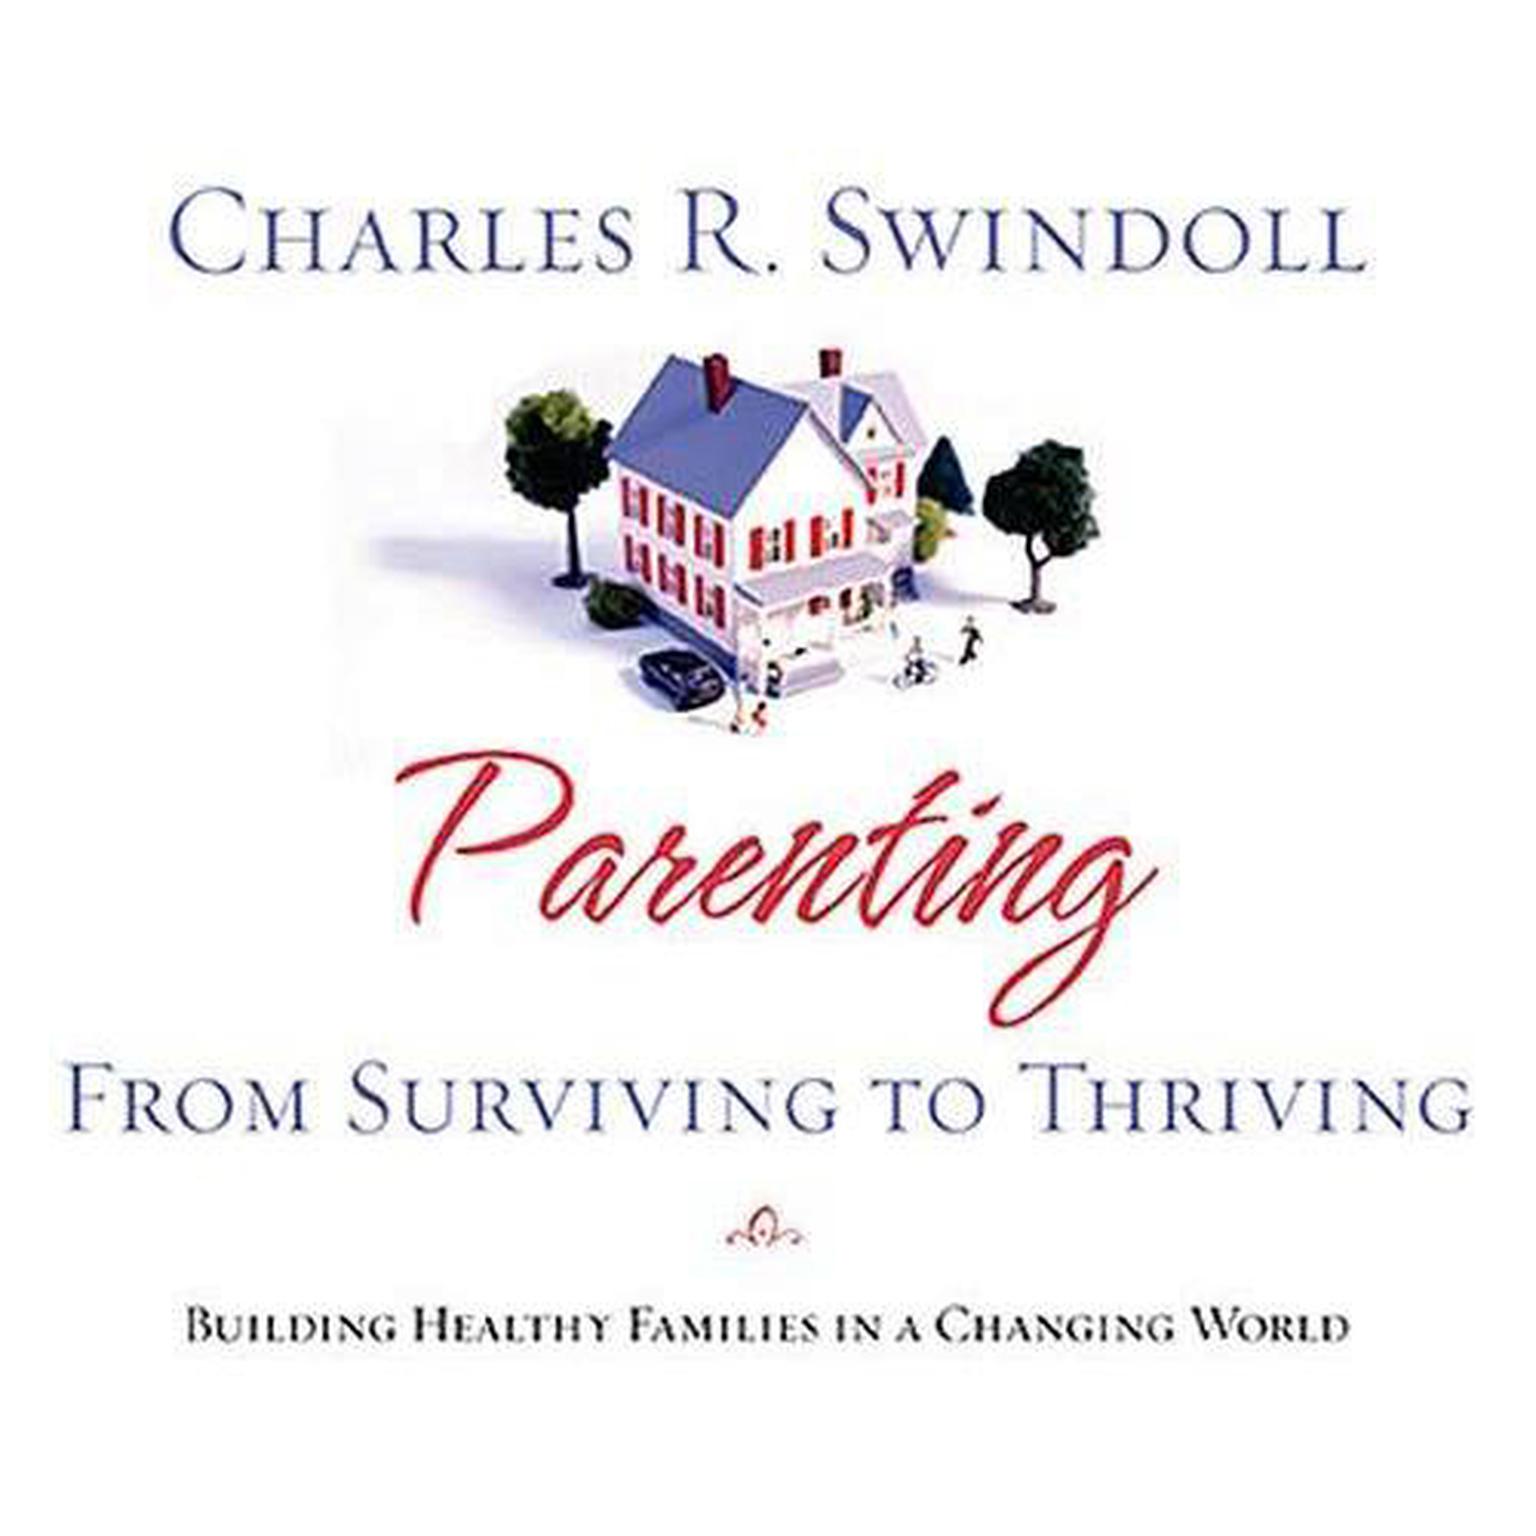 Parenting: From Surviving to Thriving (Abridged): Building Healthy Families in a Changing World Audiobook, by Charles R. Swindoll